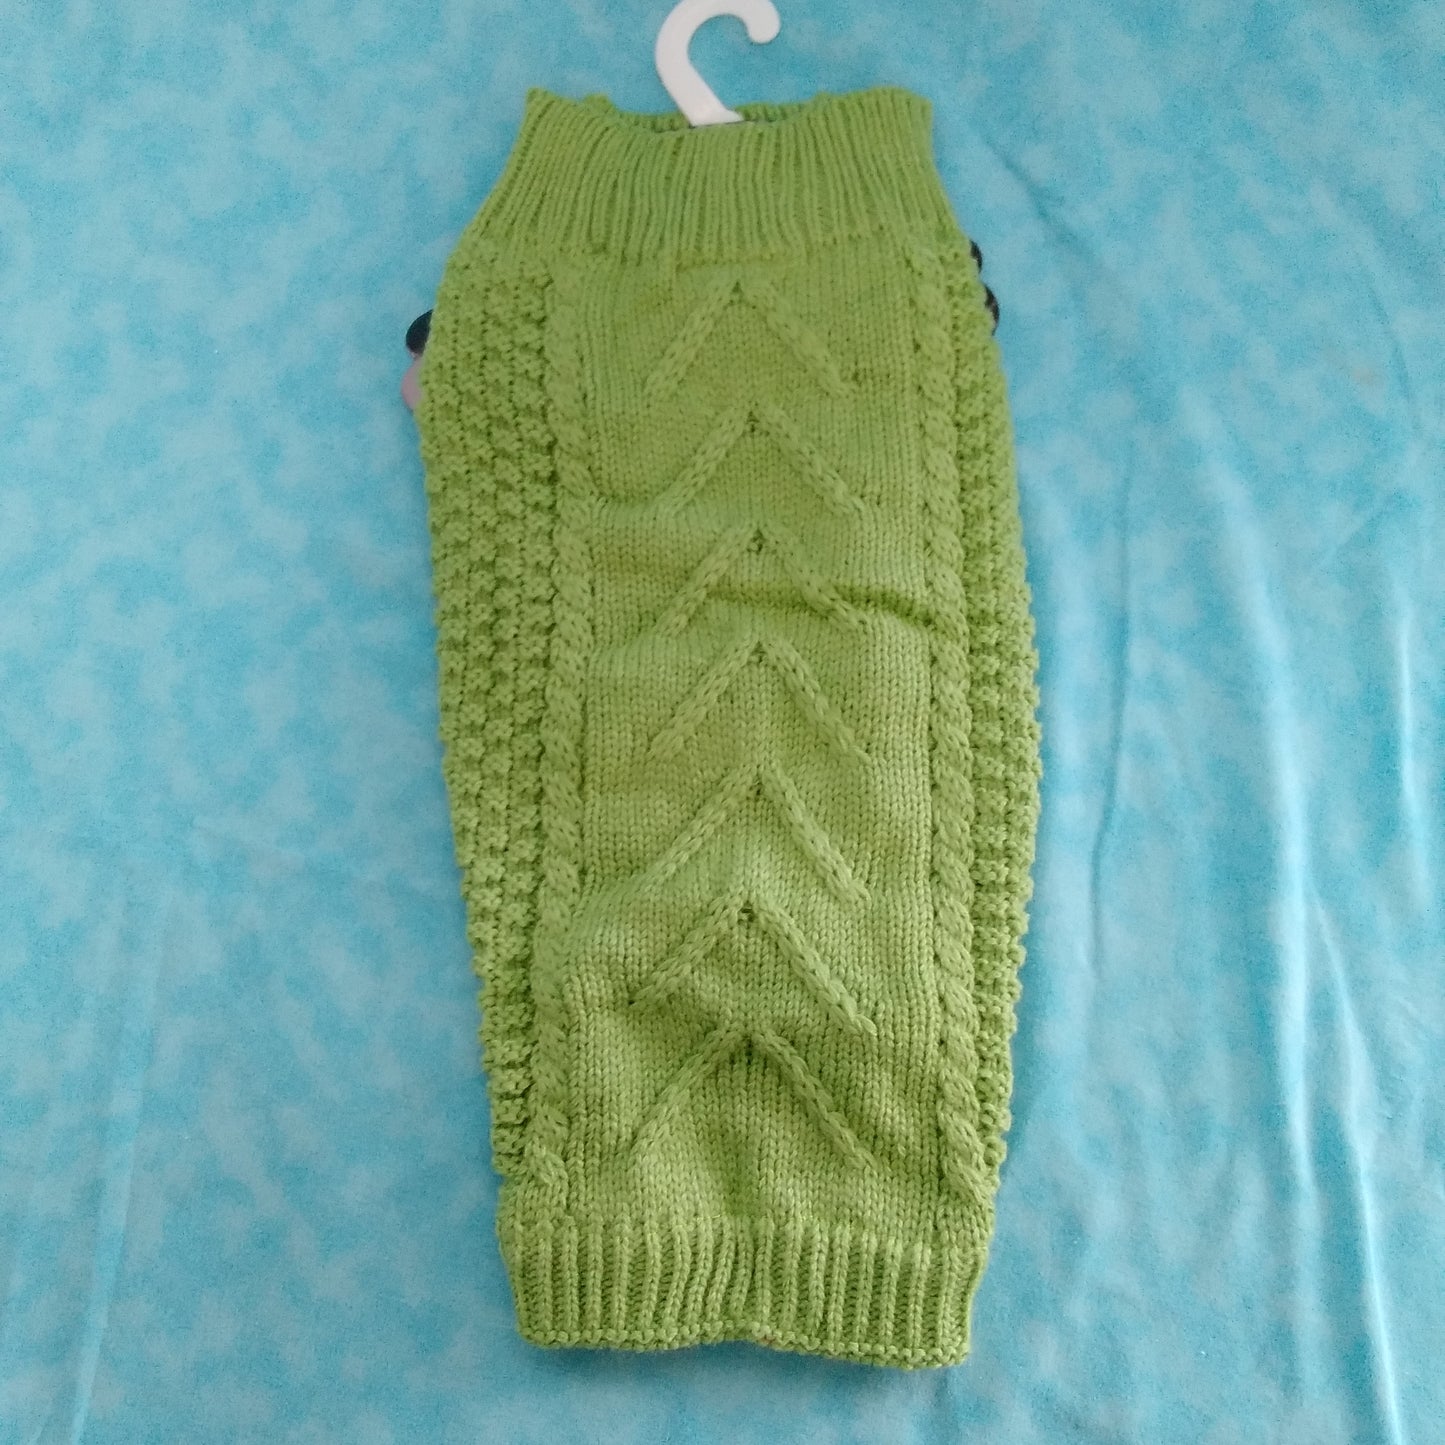 NWT - Pet Life Heavy Swirl Green Knitted Dog Sweater - Size: 18.1"